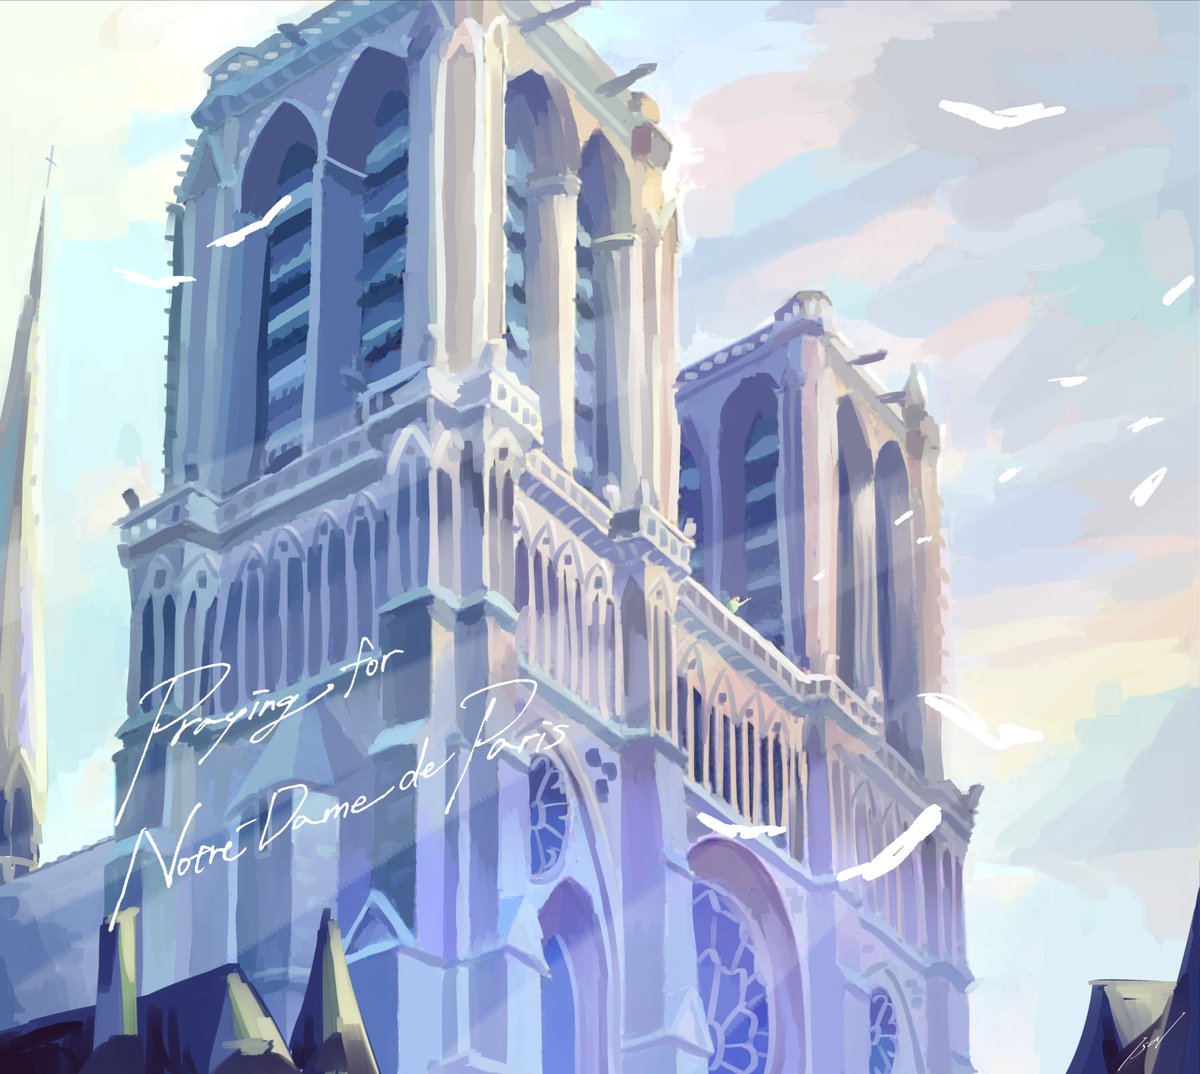 「Sing the Bells of Notre Dame 」|ｉｓａｉのイラスト